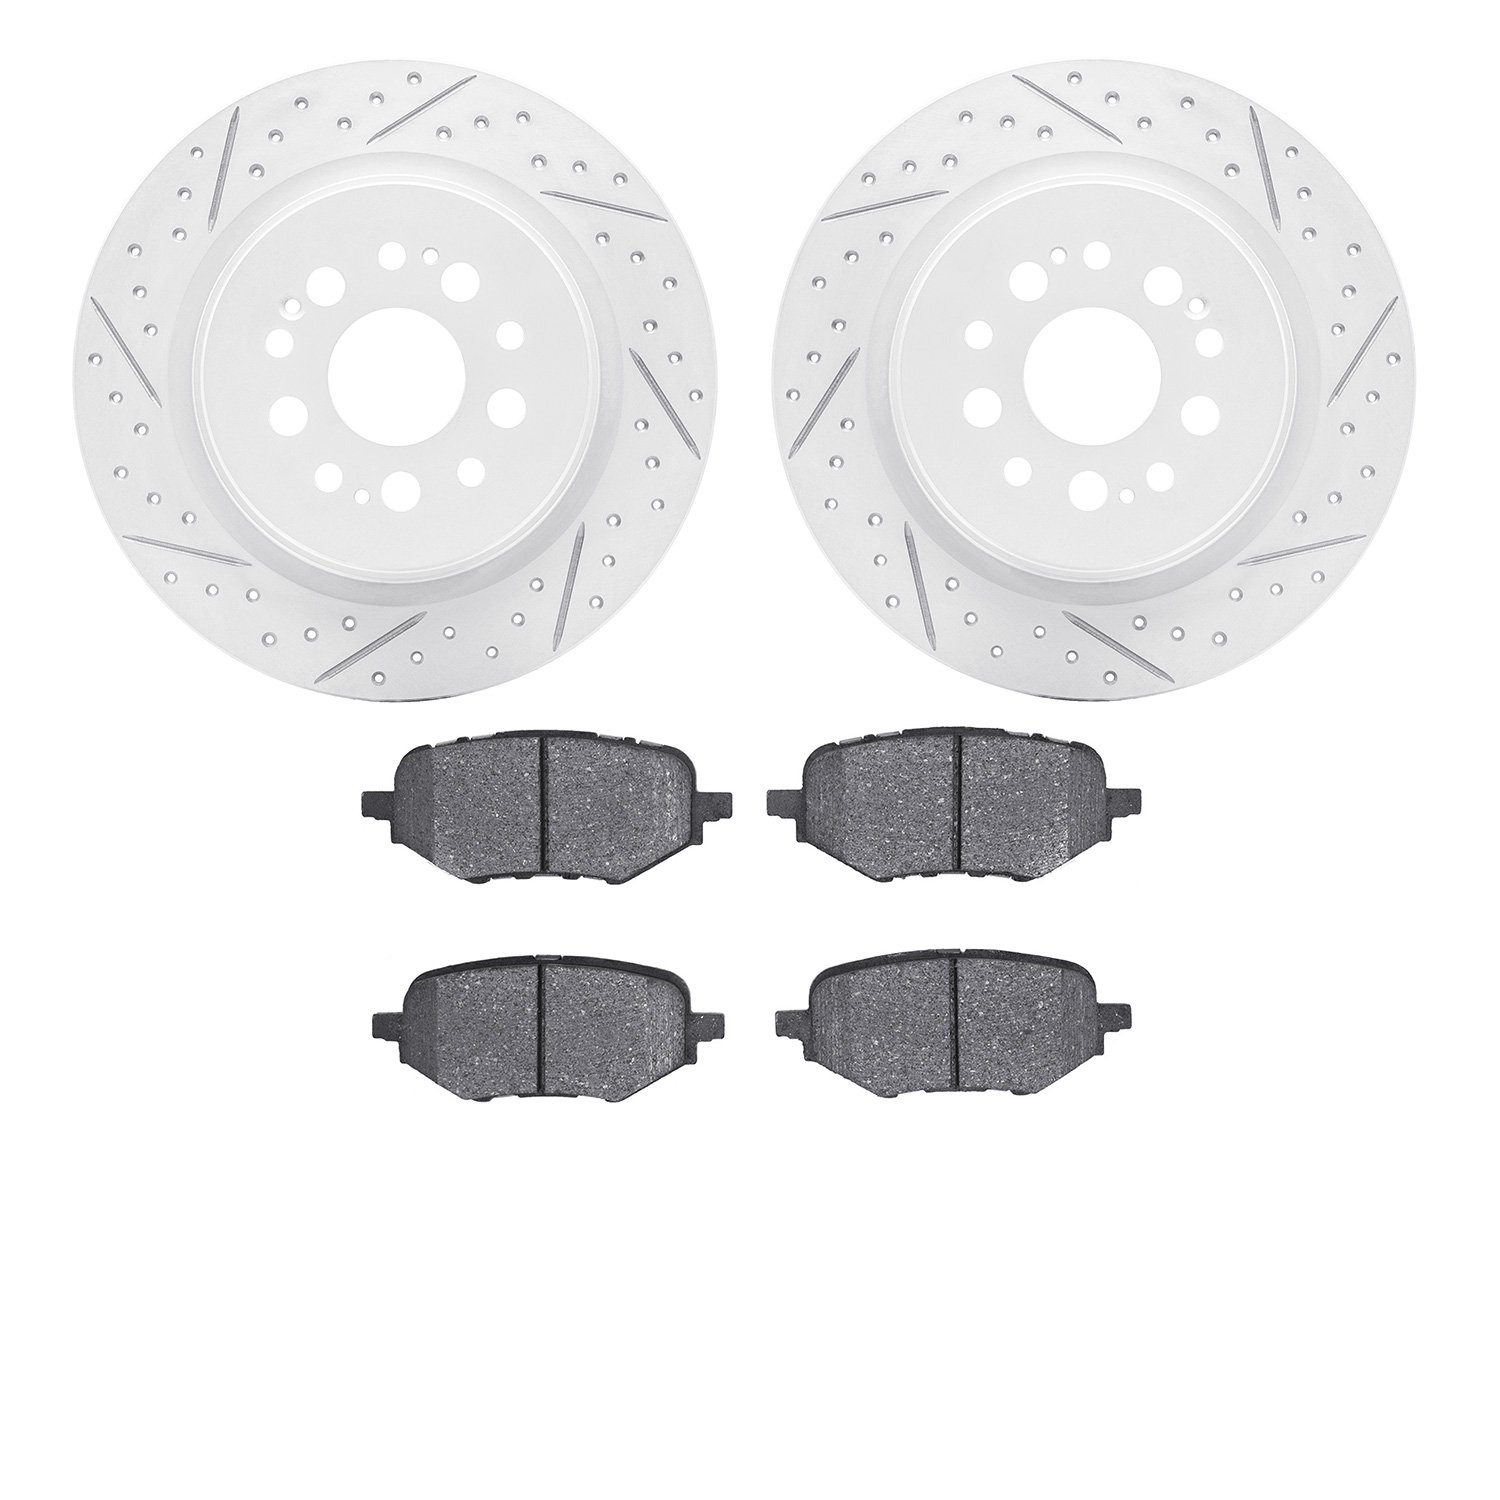 2502-59117 Geoperformance Drilled/Slotted Rotors w/5000 Advanced Brake Pads Kit, Fits Select Acura/Honda, Position: Rear